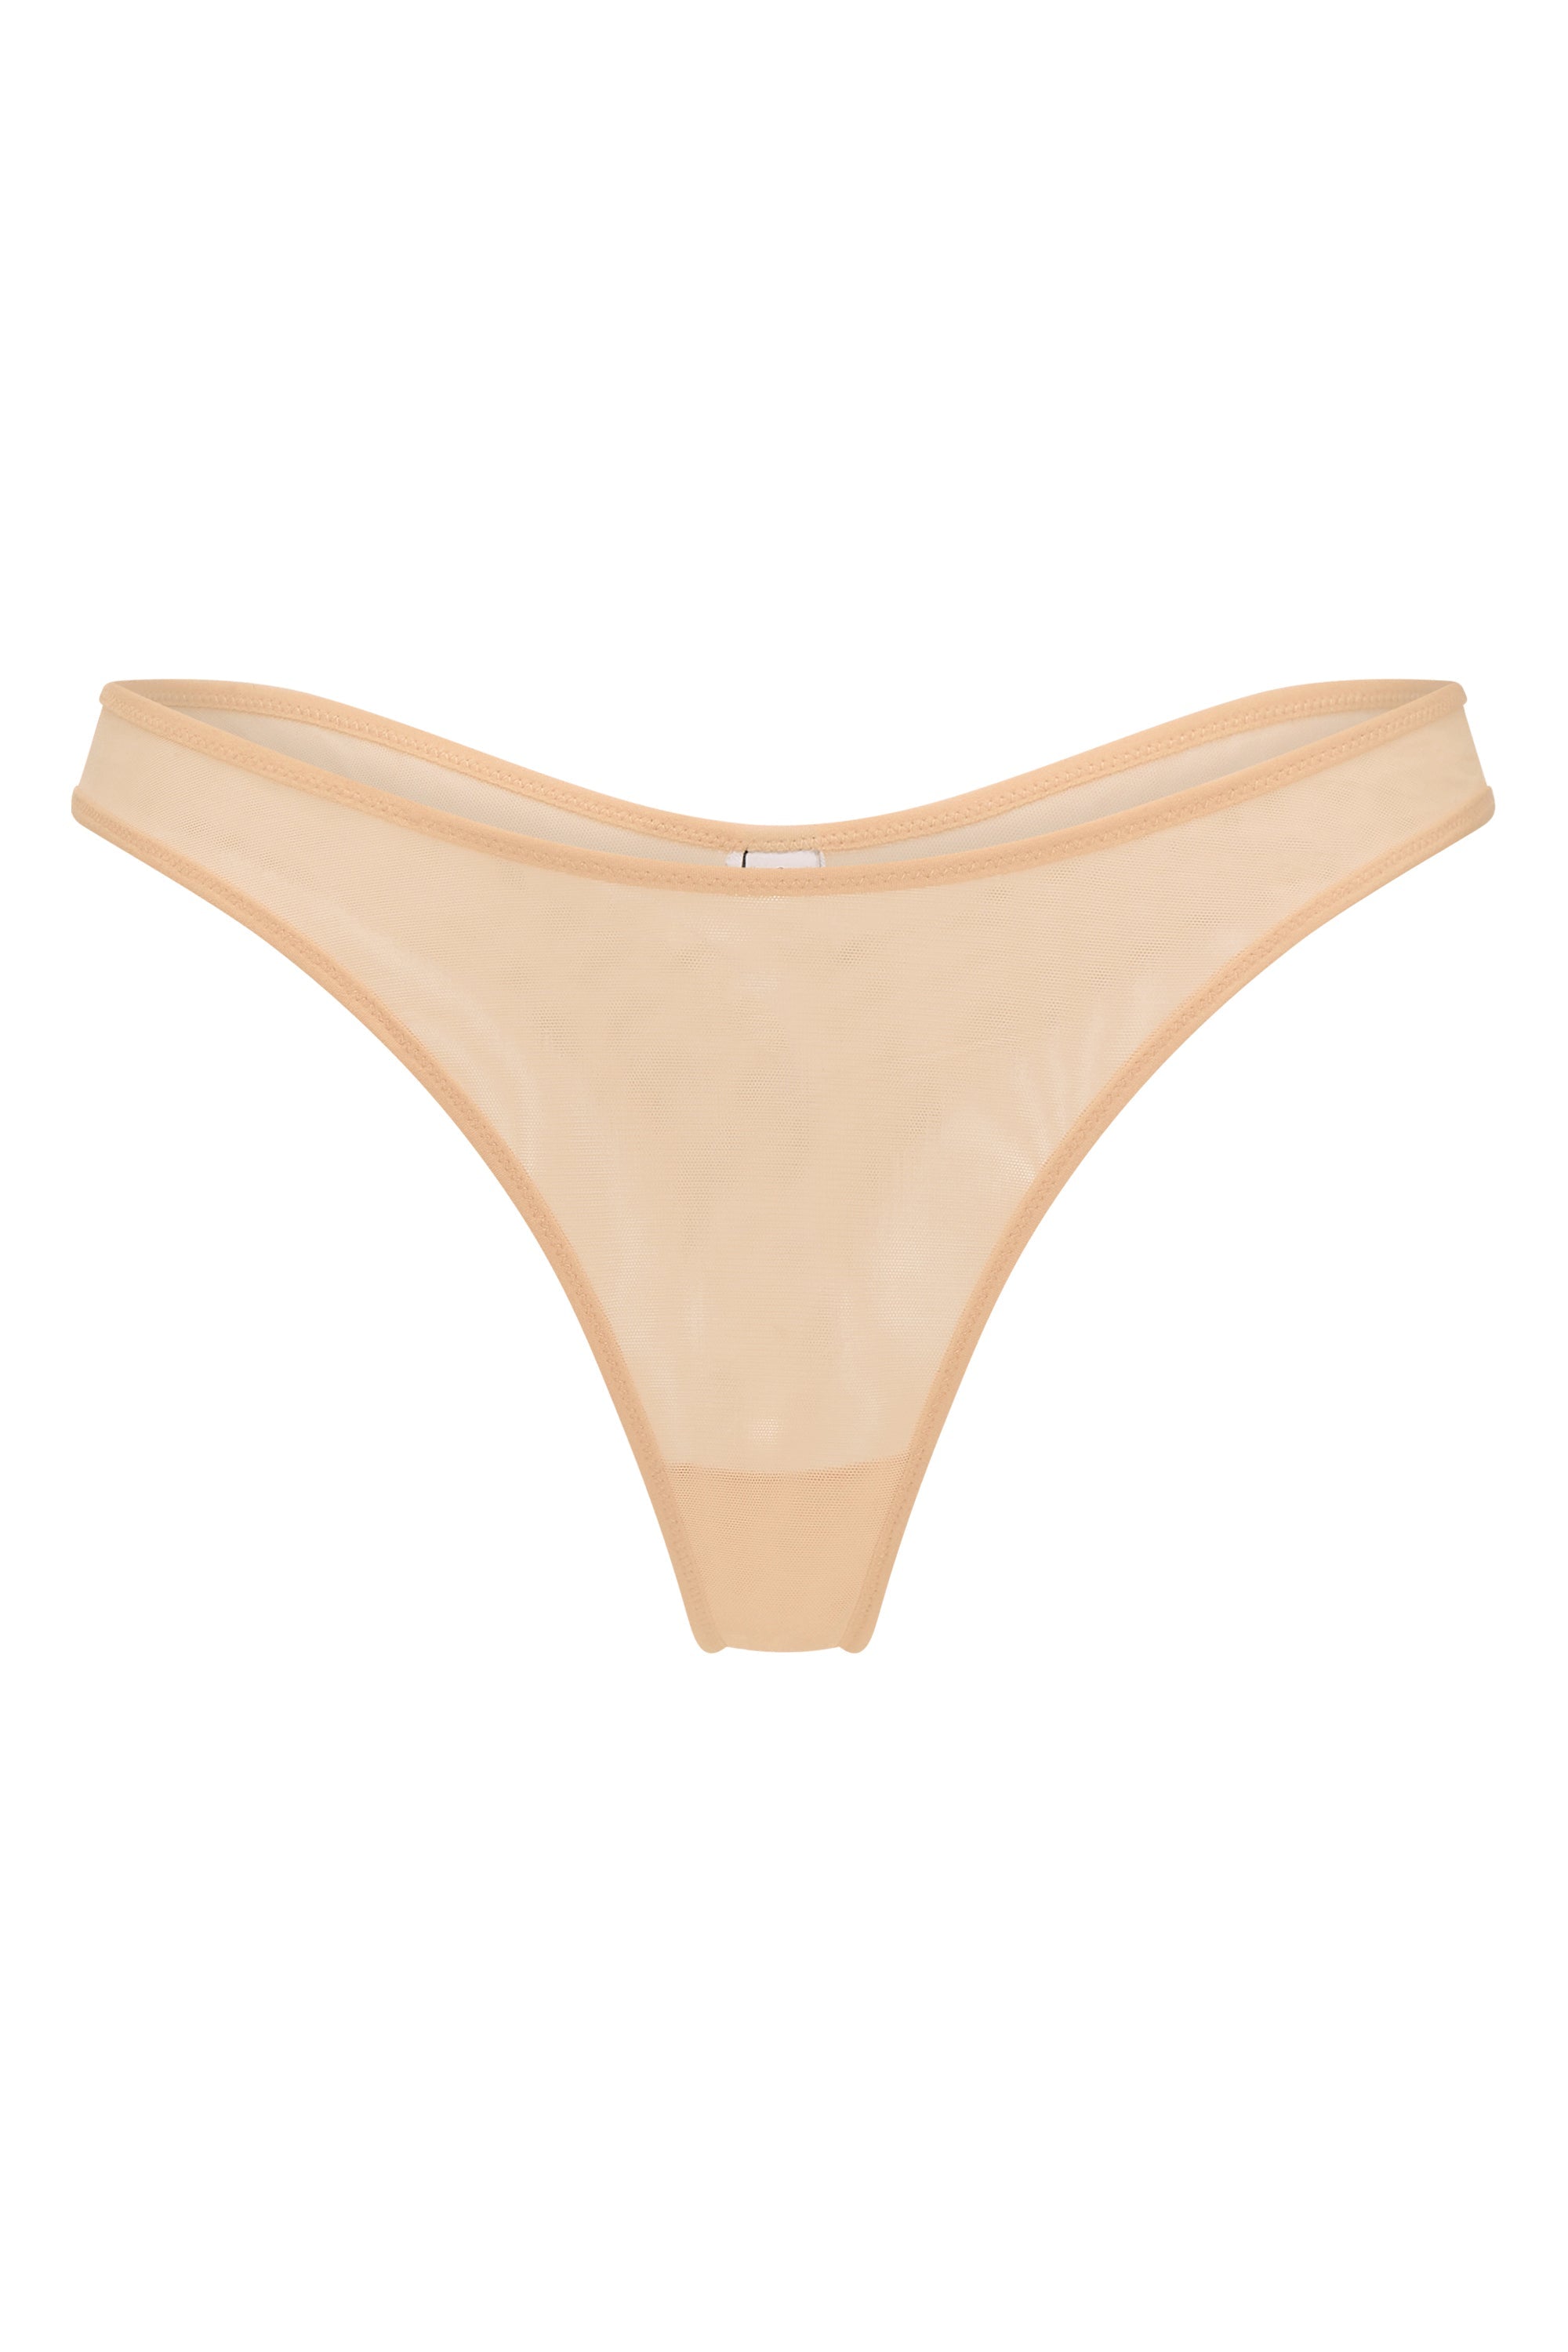 Intimates Soft Mesh Thong in Beige